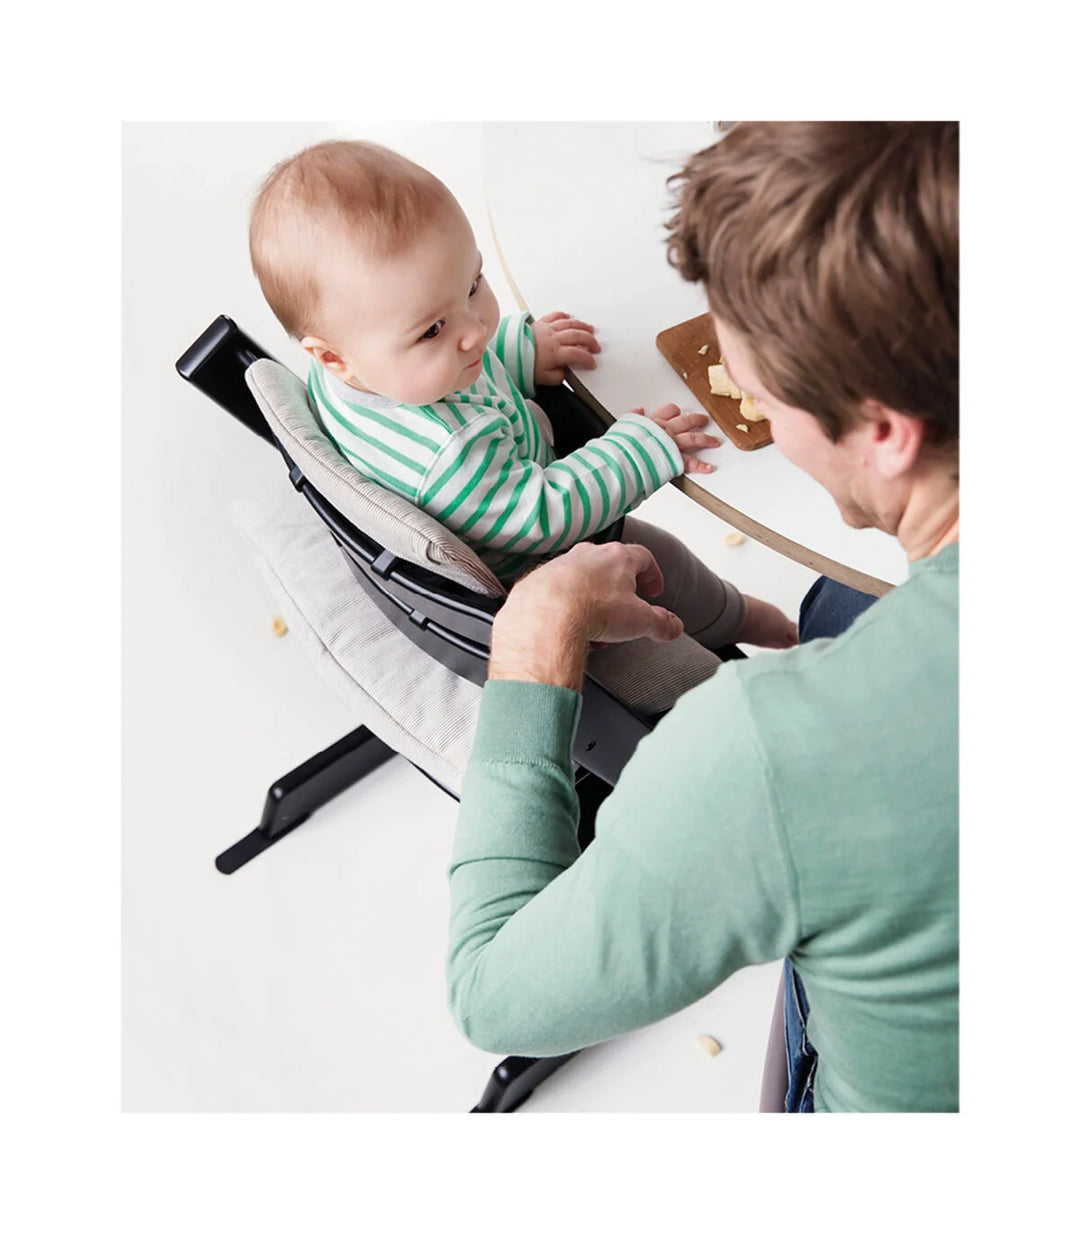 Stokke Tripp Trapp Natural Oak Wood Baby & Toddler High Chair +